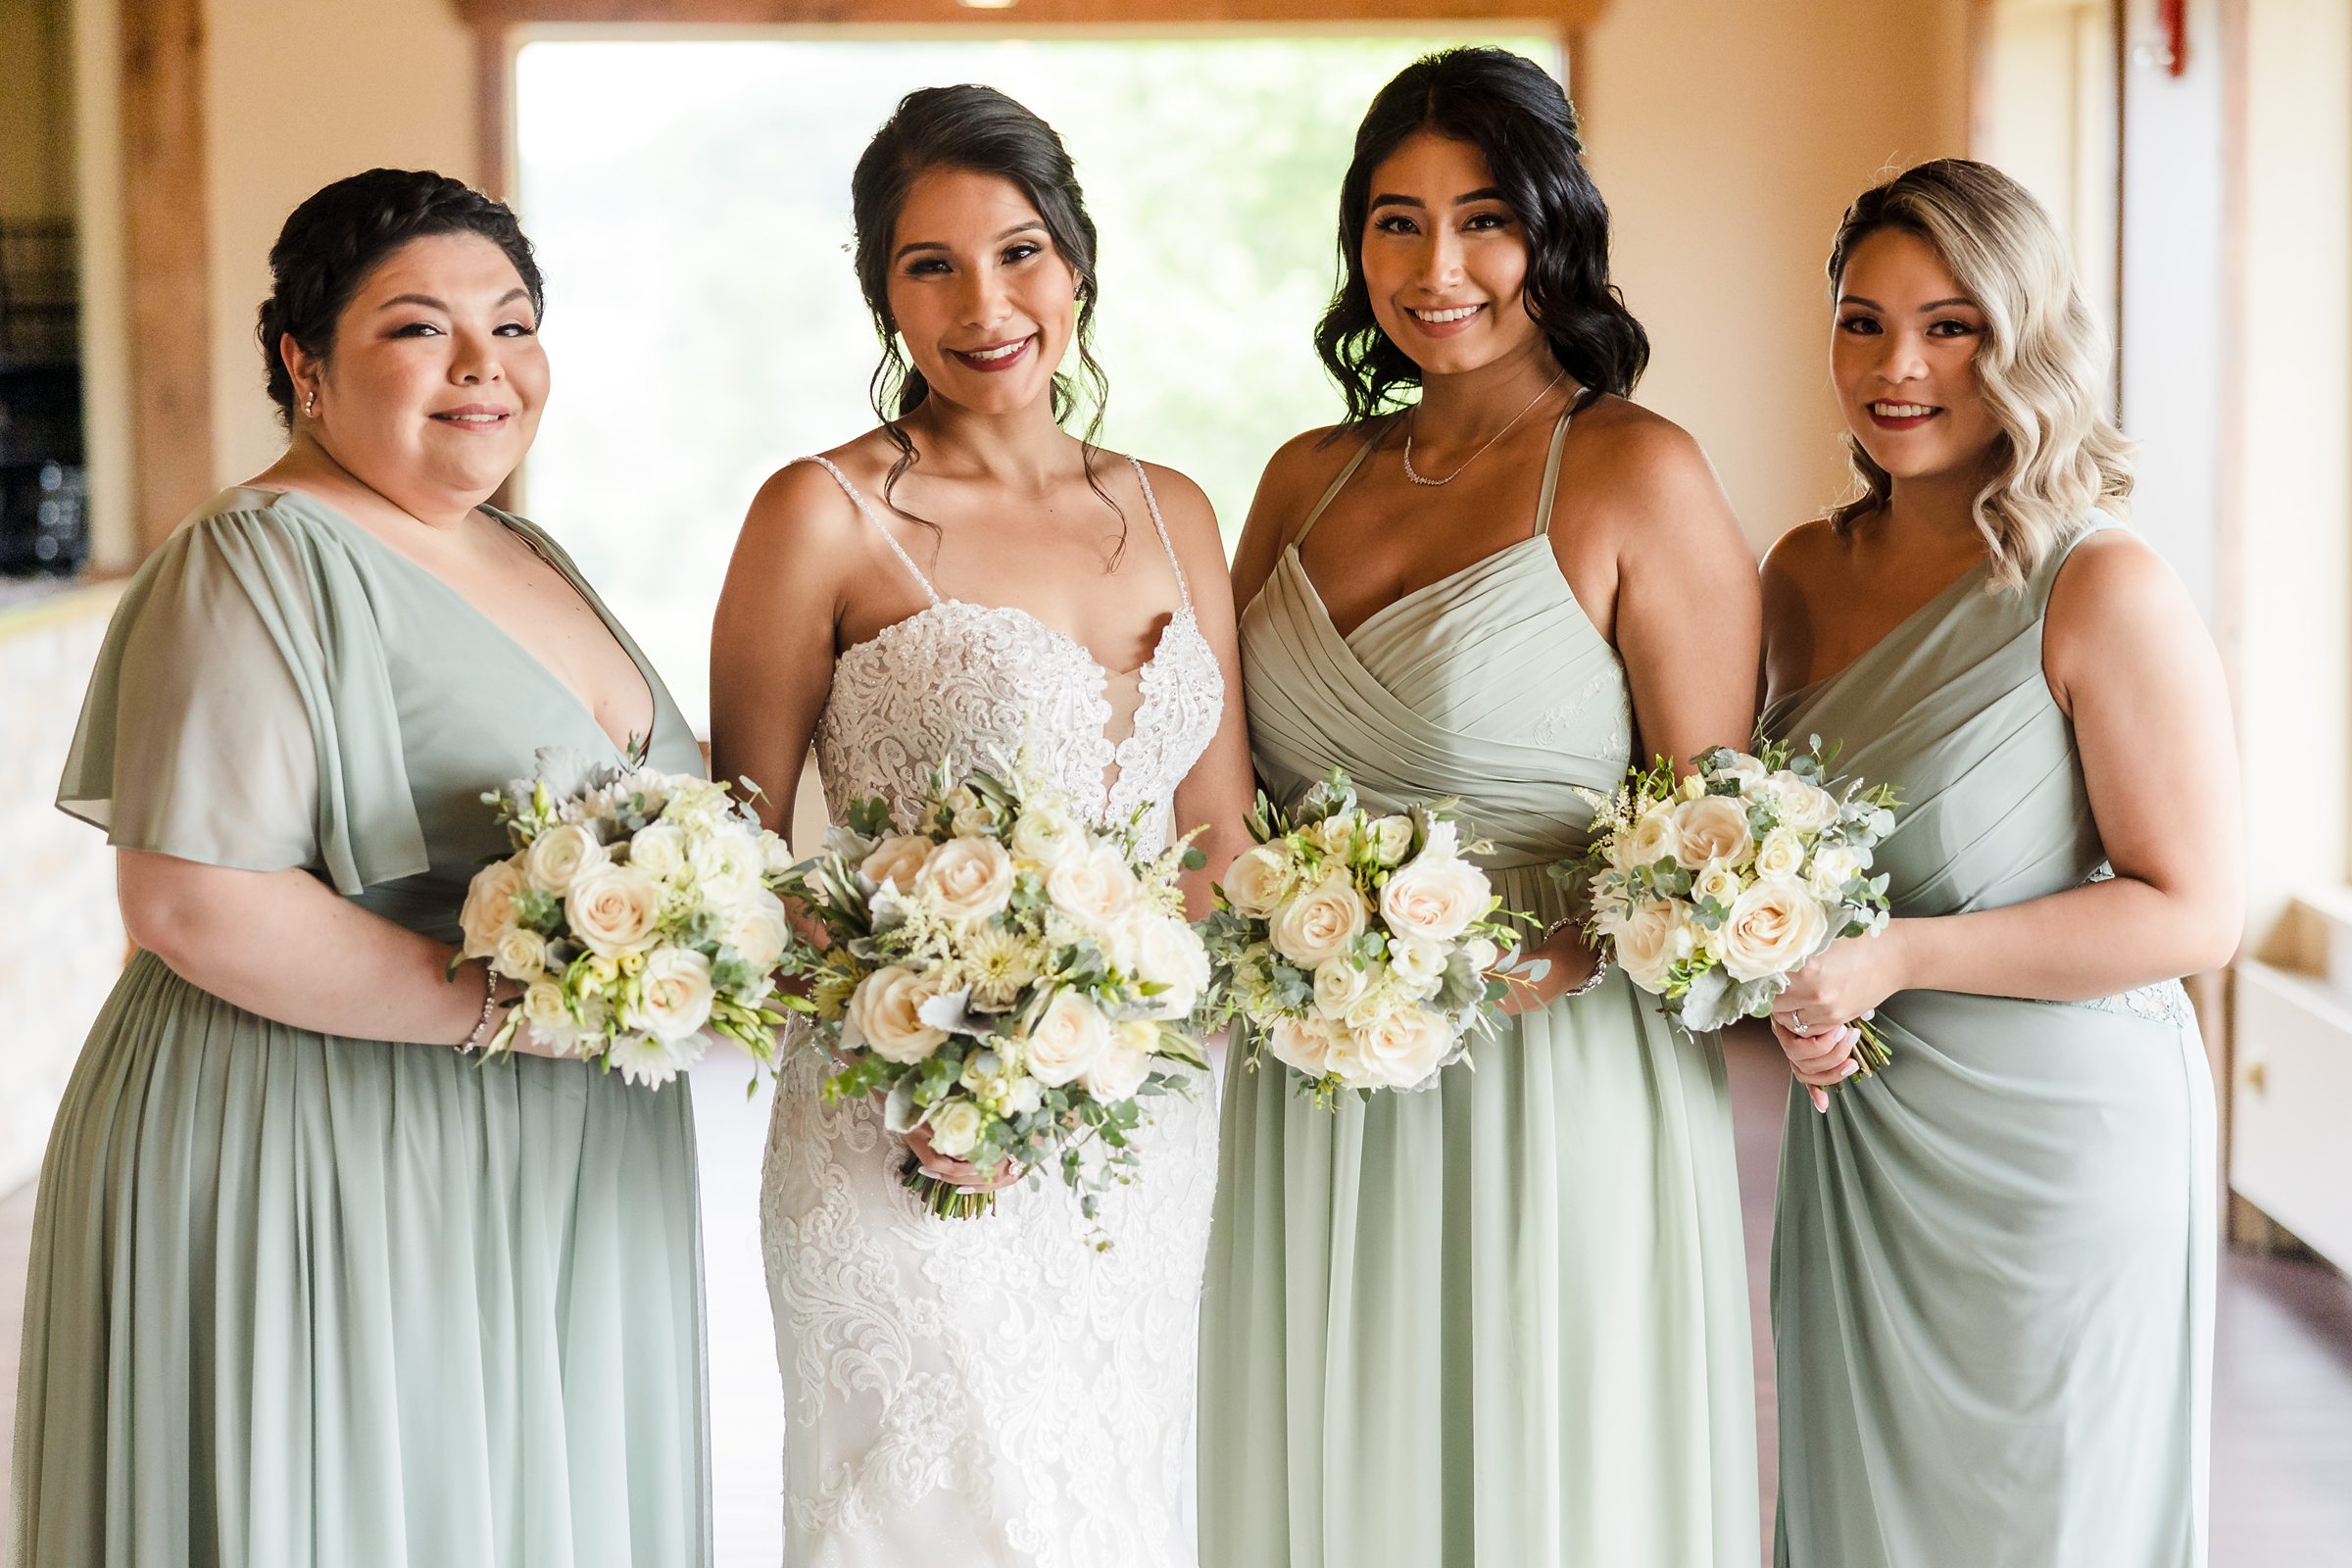 Bride and Bridesmaids during a wedding at the Fisherman's Inn in Elburn, Illinois.